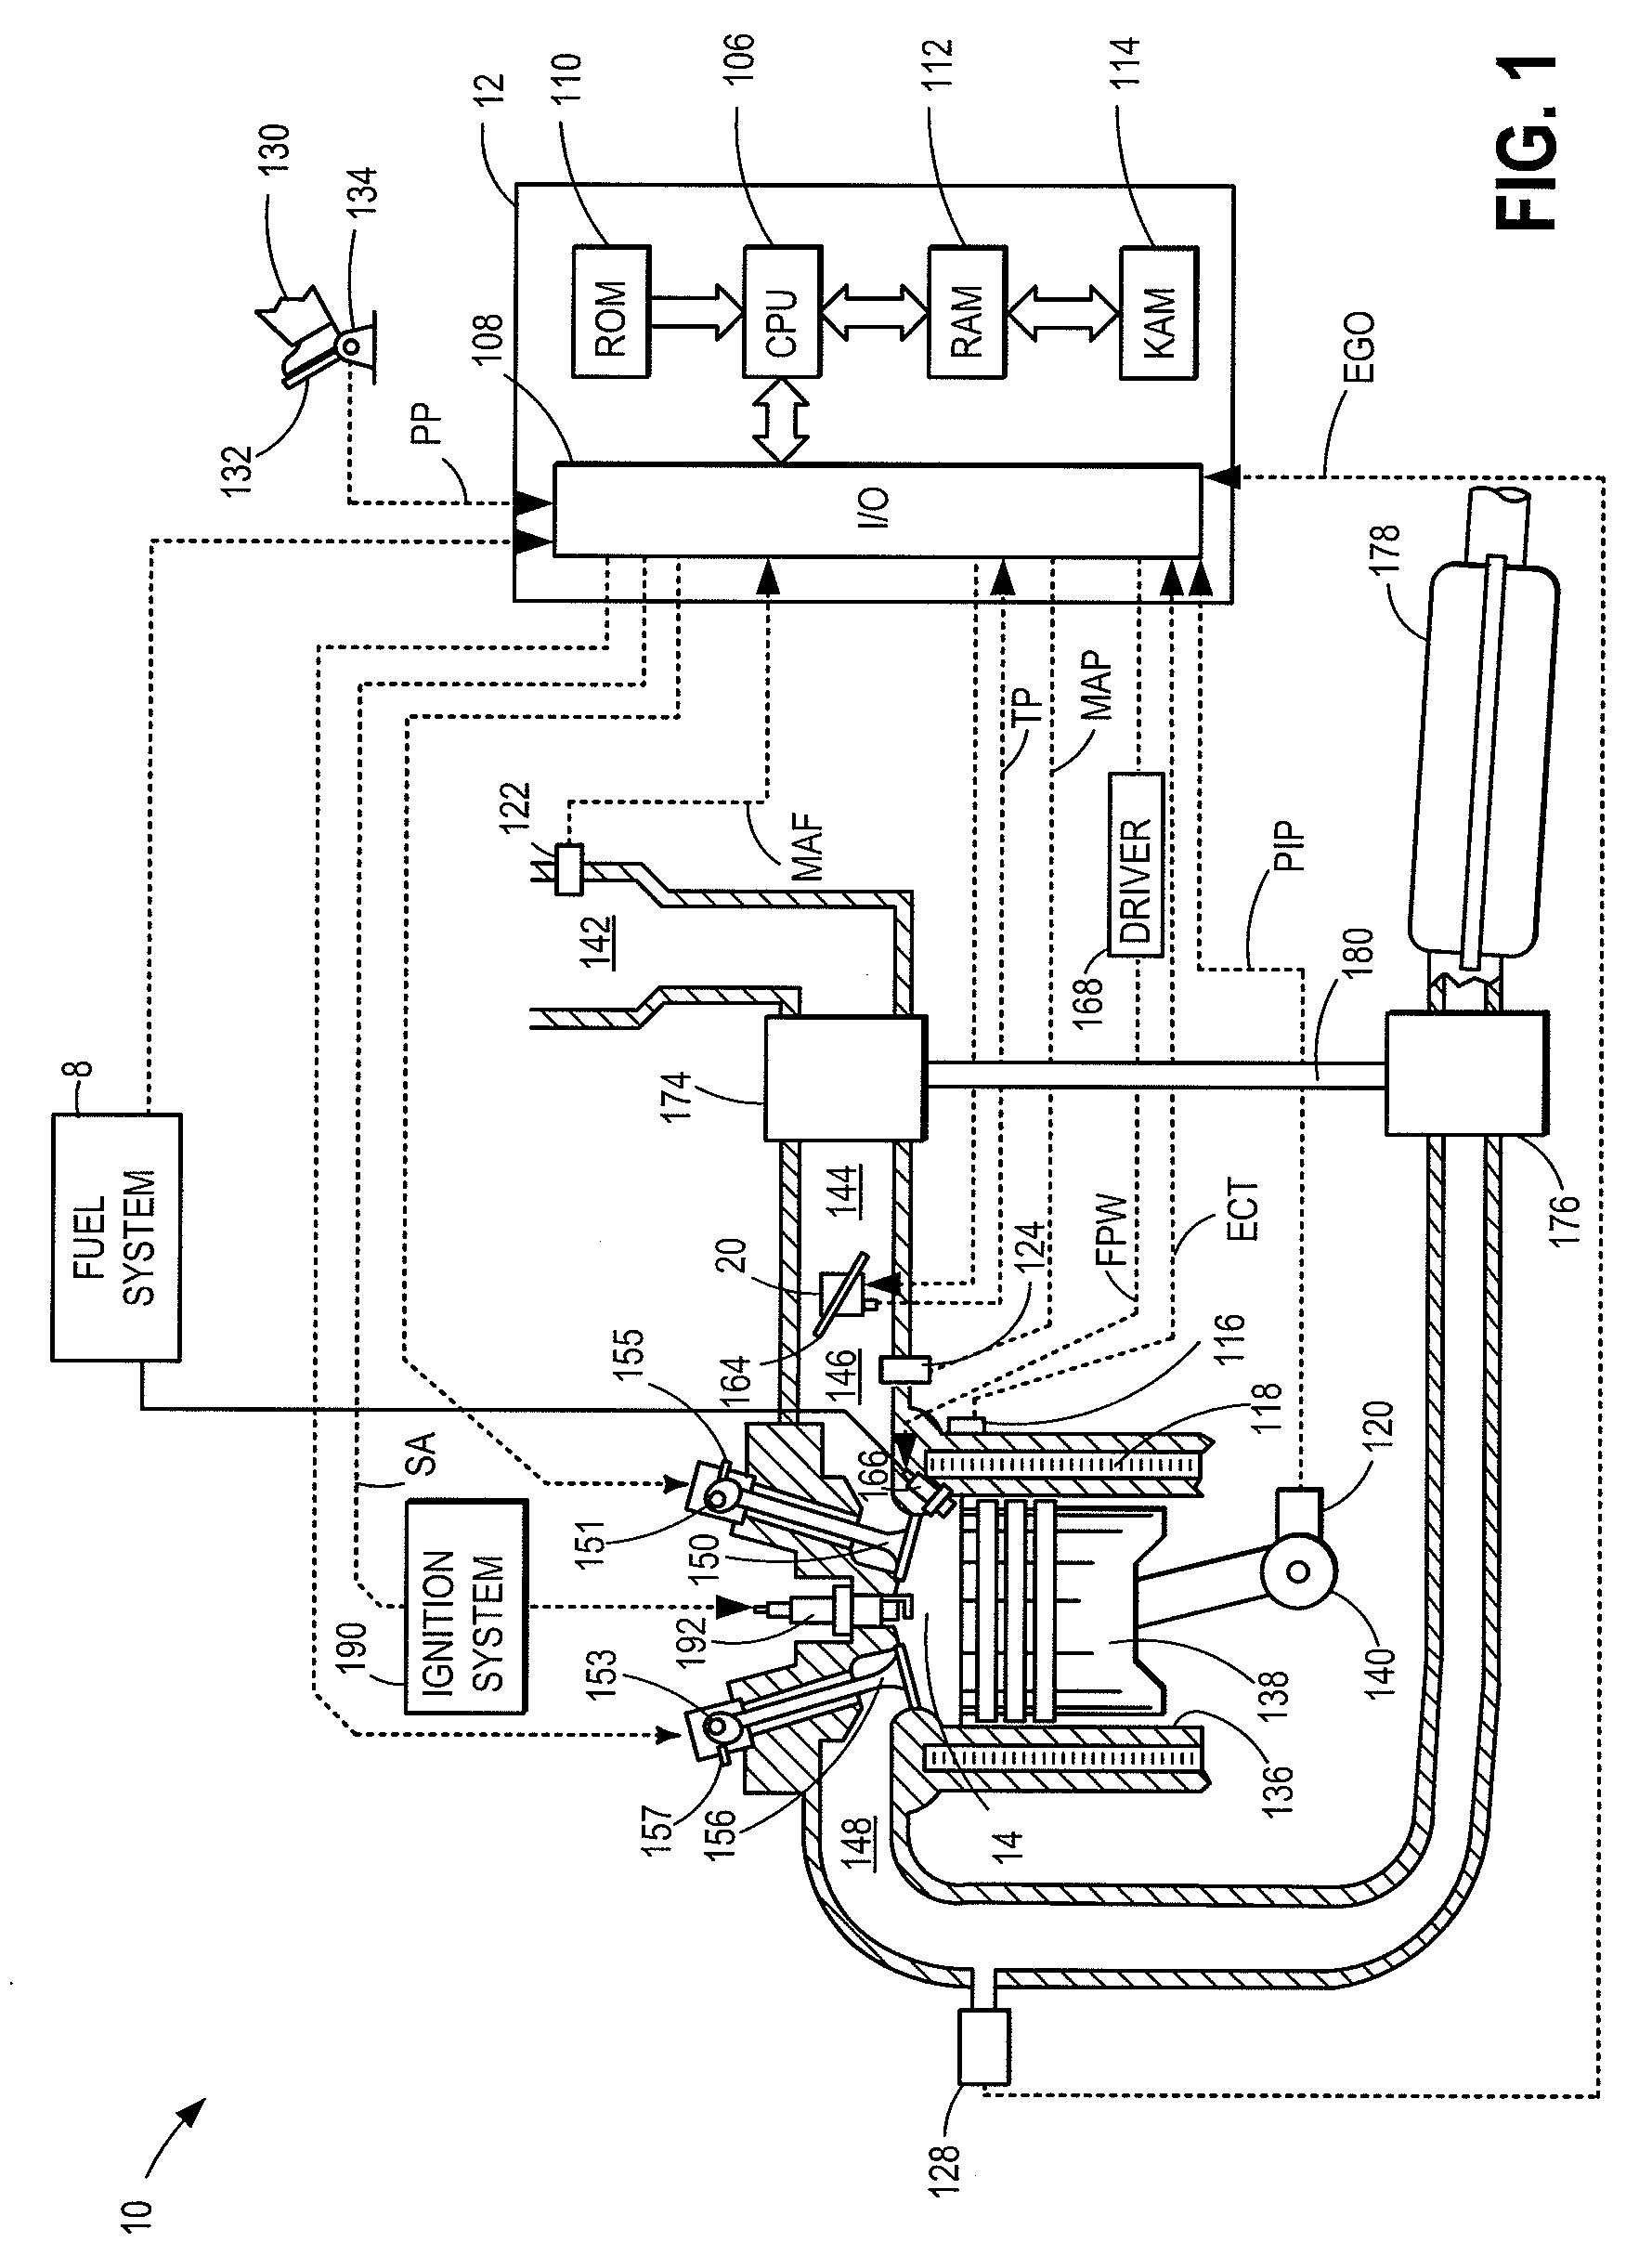 Fuel-Based Injection Control